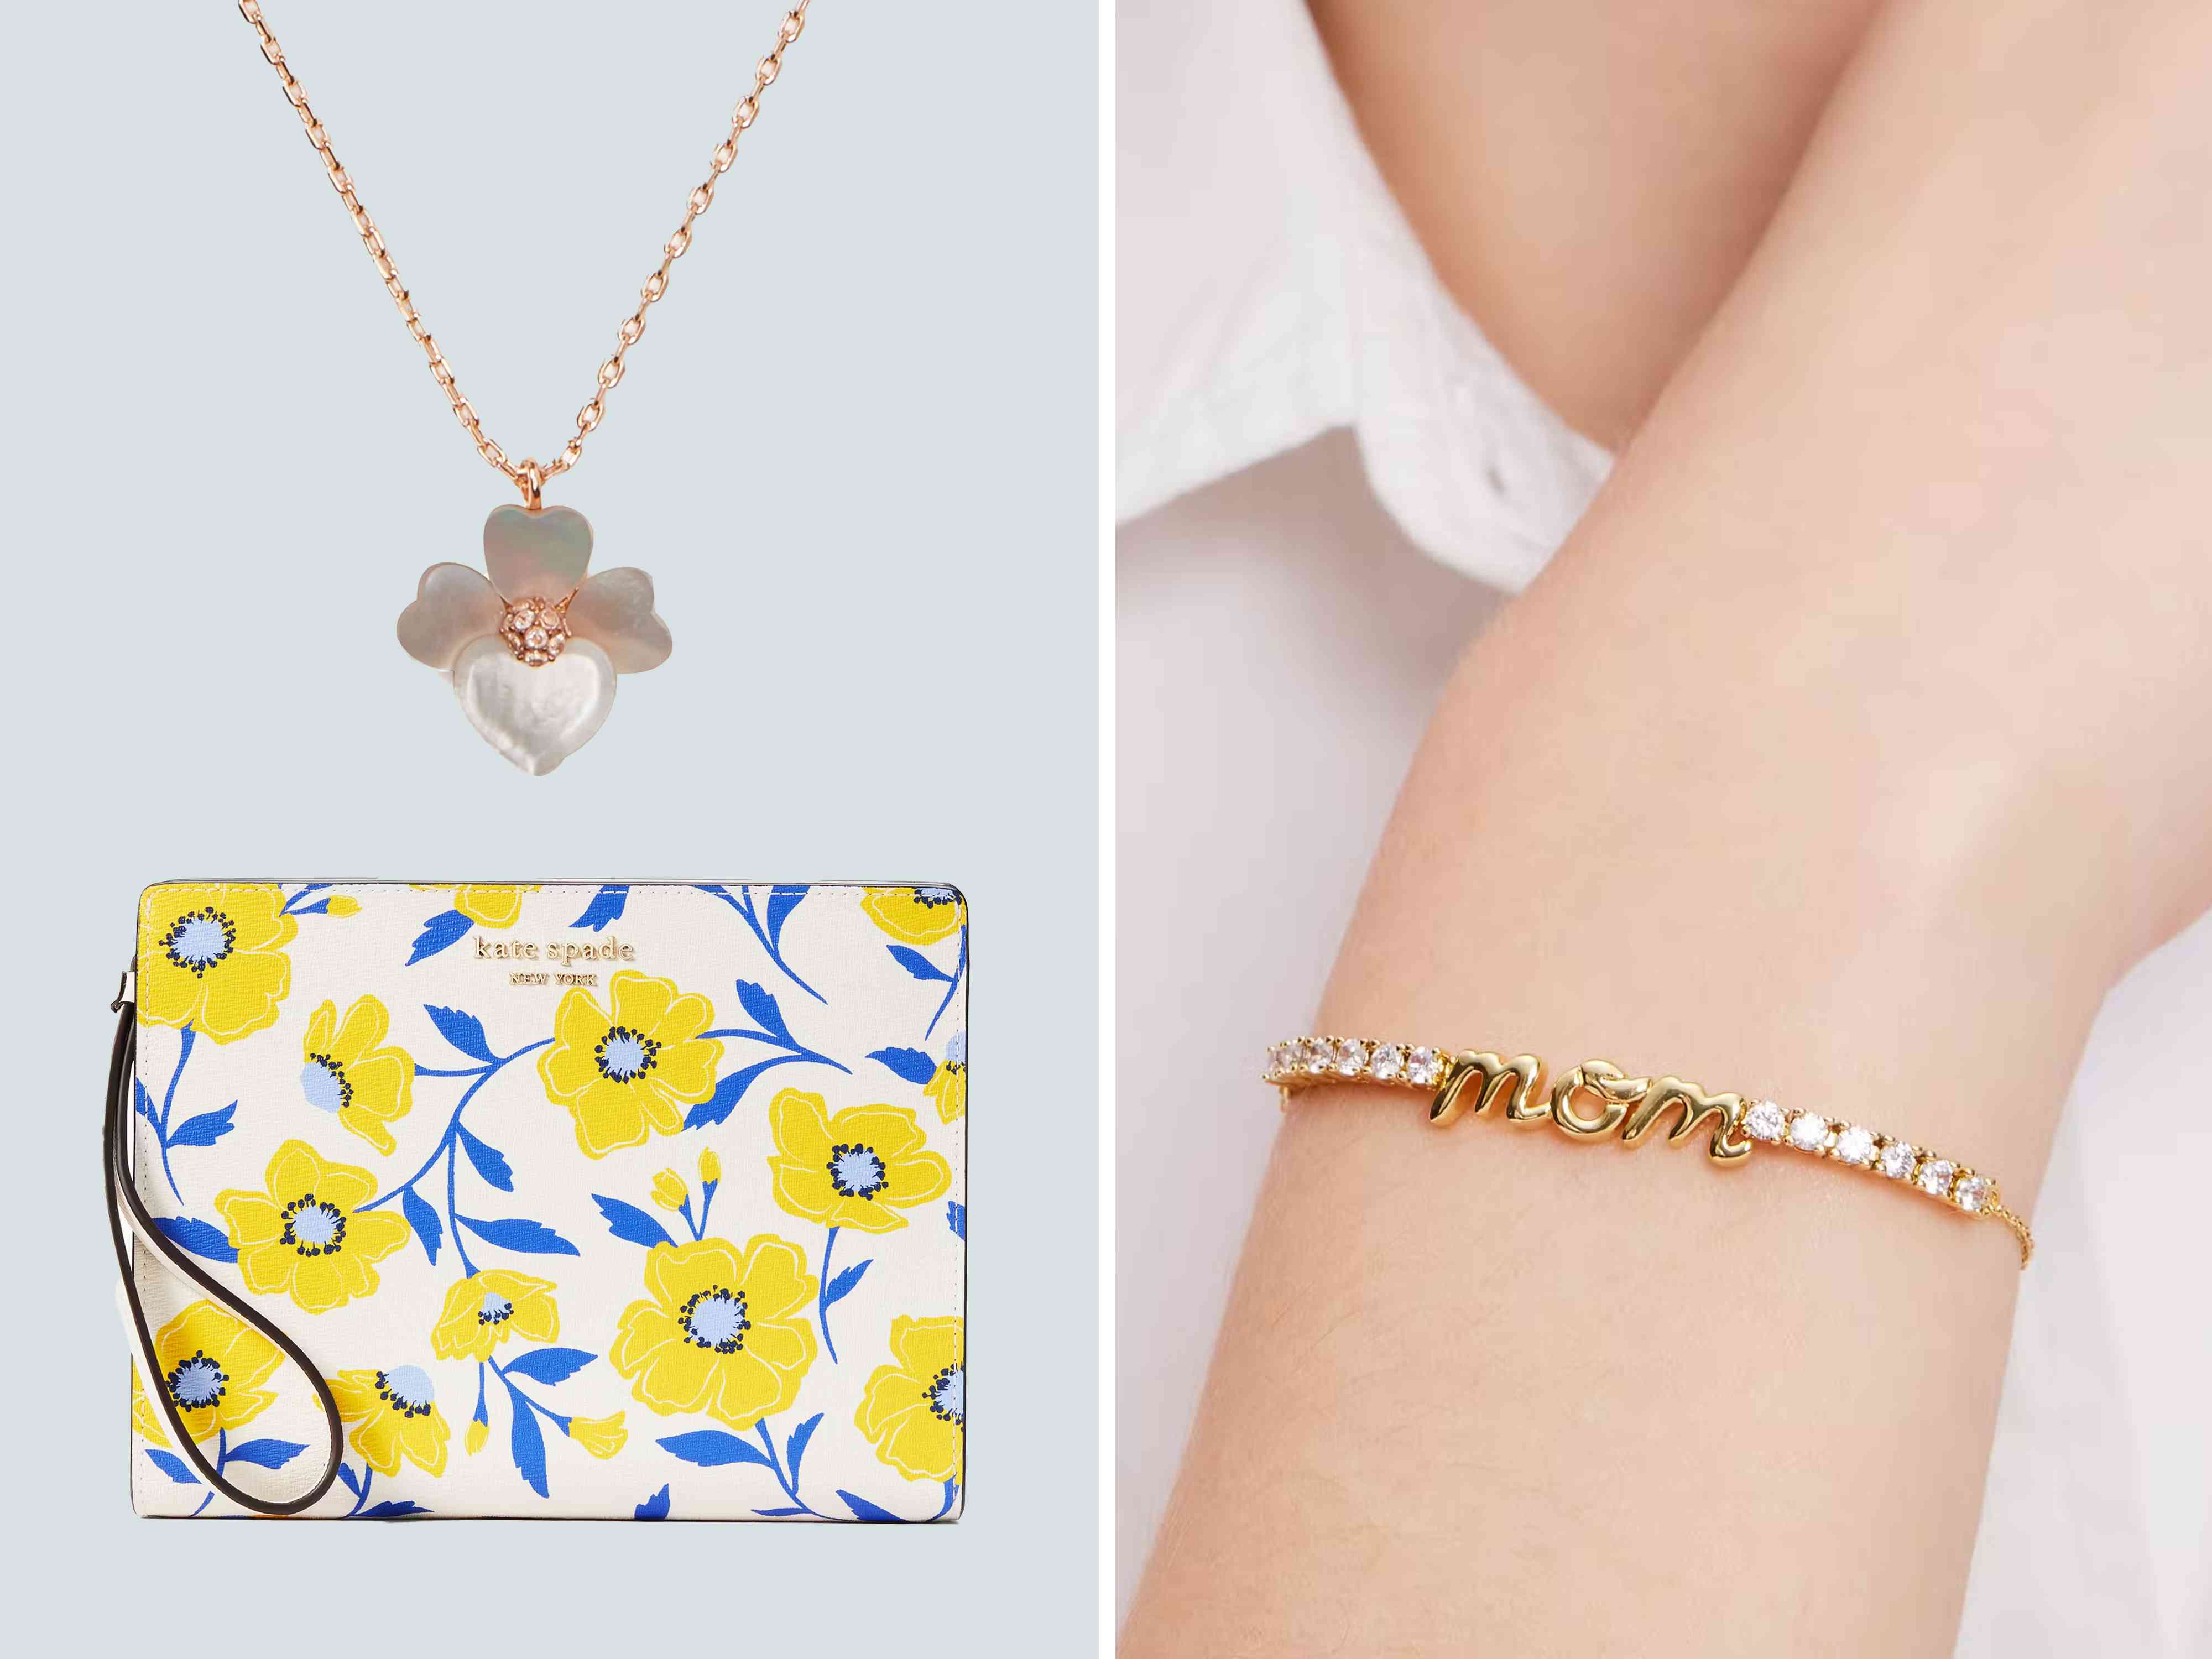 Kate Spade Dropped a Mother's Day Sale on Its Famous Accessories—All Under $100